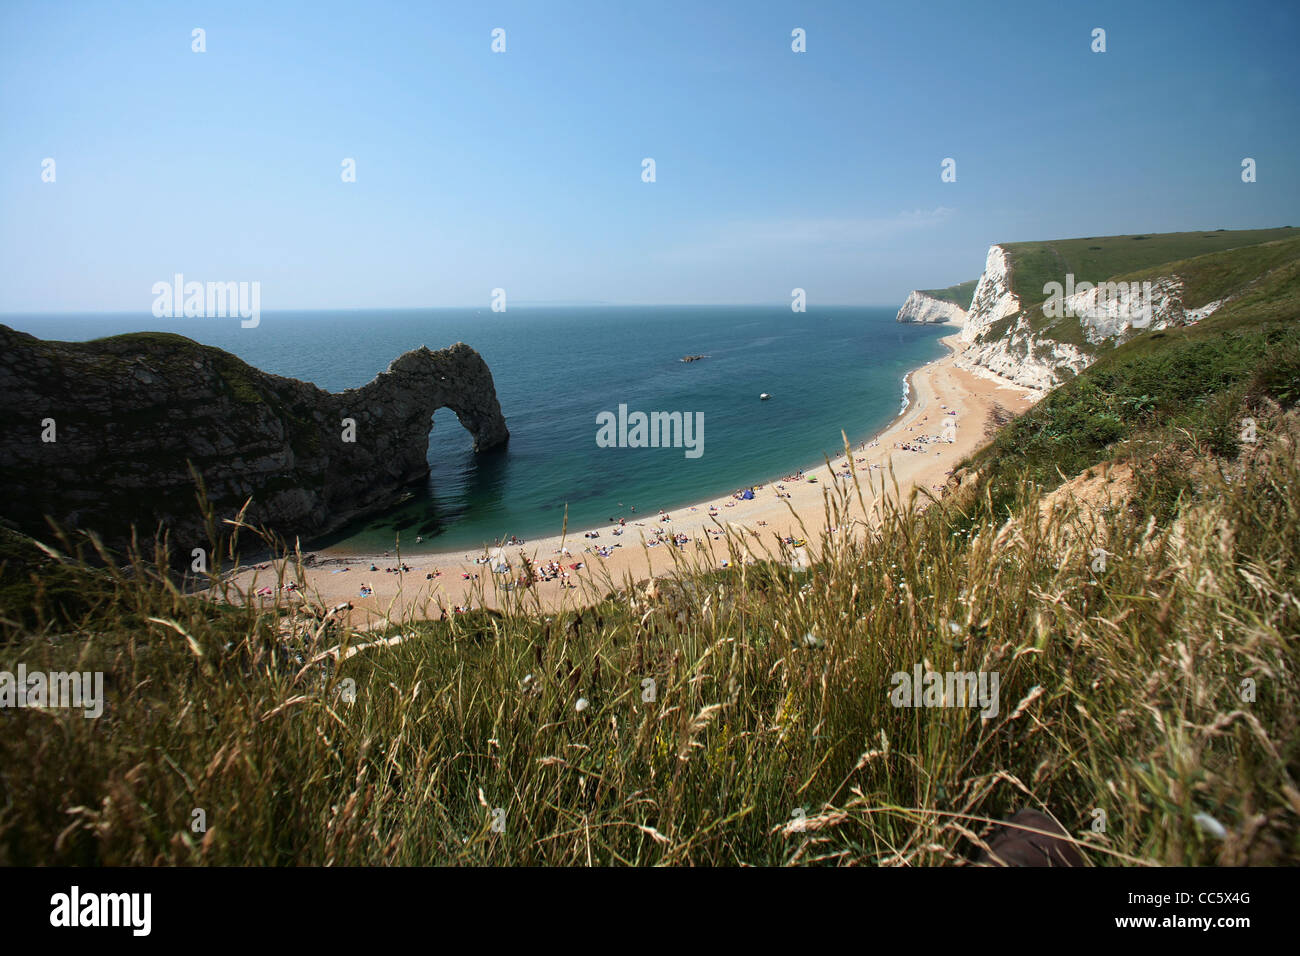 The picturesque Durdle Door on England's south coast at Dorset. Stock Photo